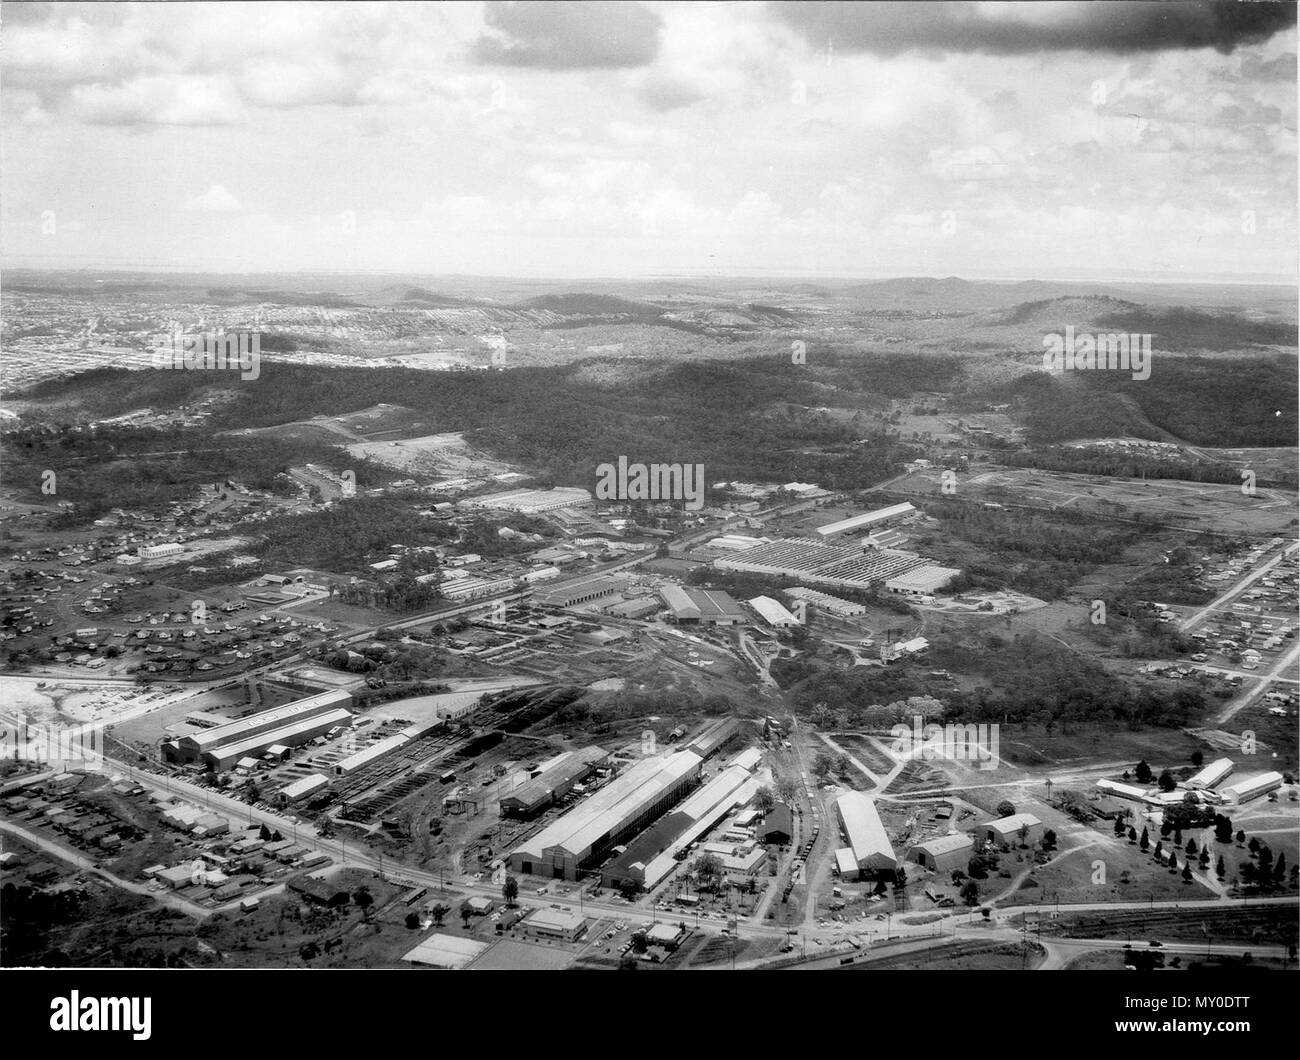 Rocklea Industrial Area, December 1957. The Courier-Mail 8 April 1954  INDUSTRIAL SITES DEMAND. Southern firms set up offices and factories (  )   A BIG demand for industrial sites in and around Brisbane has been made in recent weeks by large southern industries and manufacturing firms.  Sydney and Melbourne firms which formerly had only a representative in Brisbane are now setting up branch offices, storage rooms, and, in some cases, factories. Real estate agents reported yesterday that already several sales of small sites had been made, while other firms had placed orders for suitable sites. Stock Photo